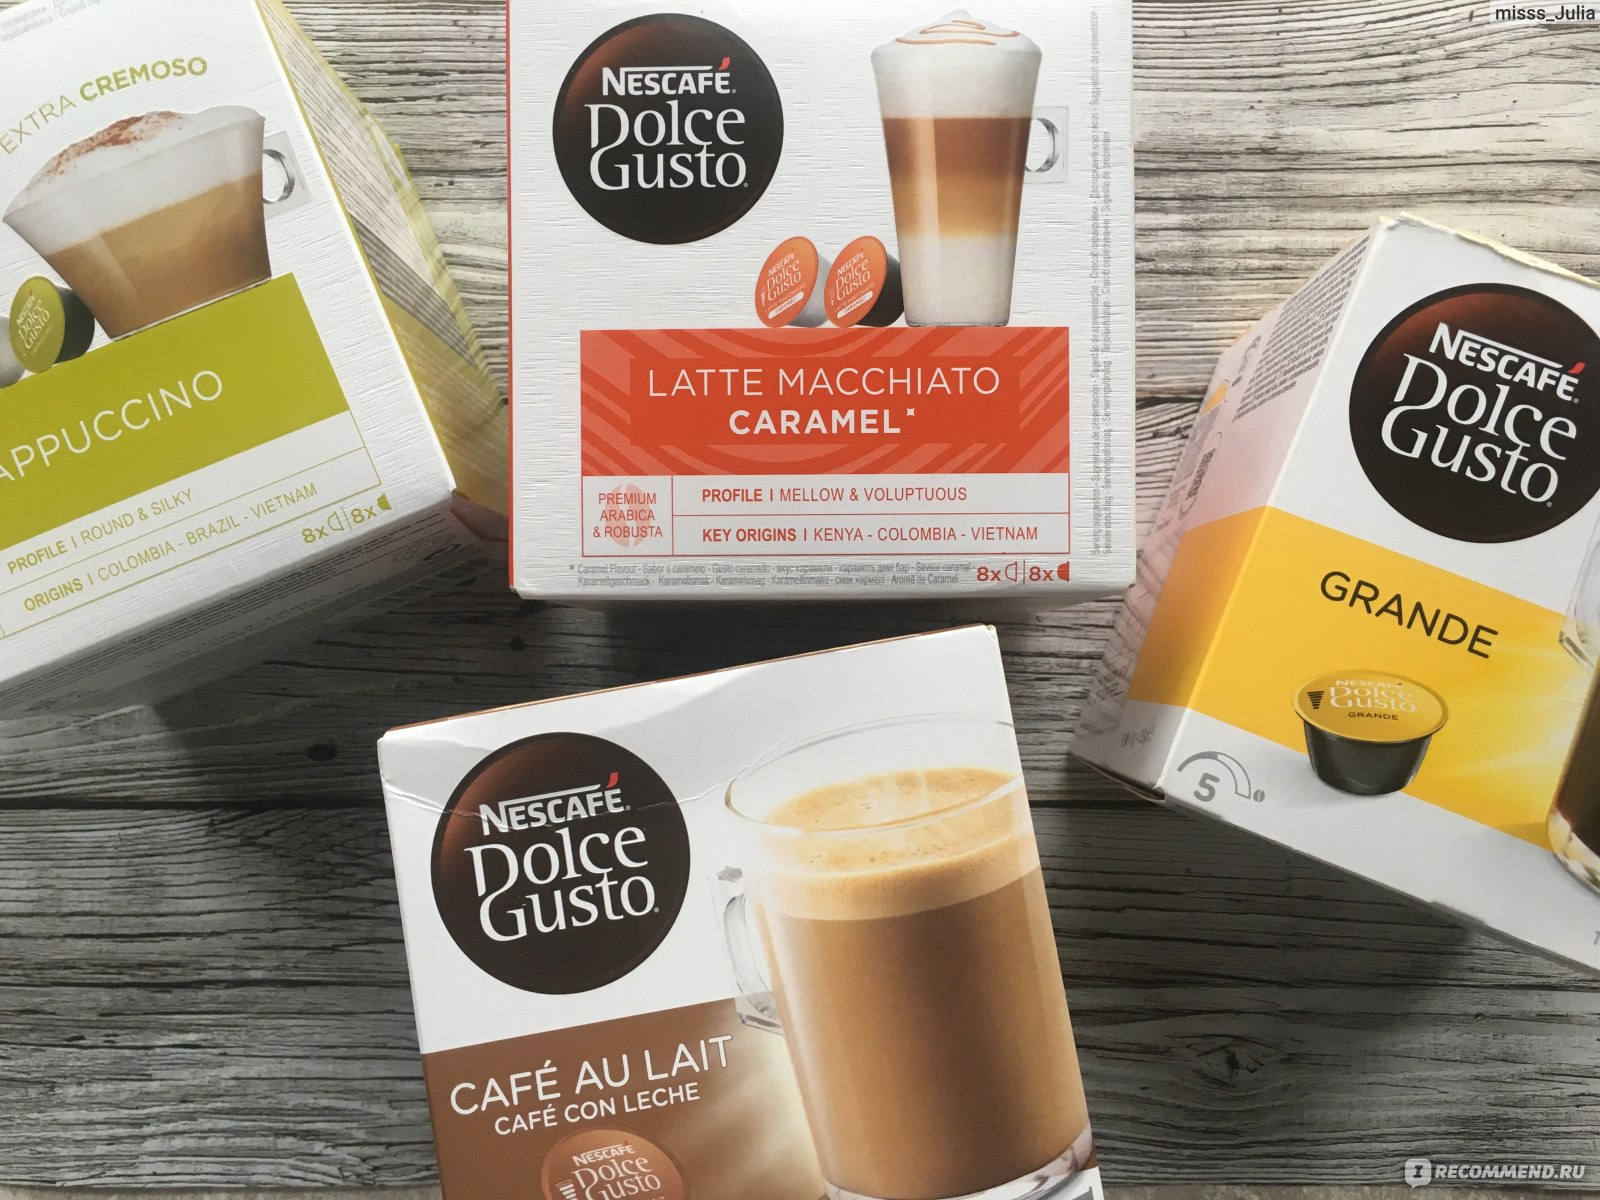 Nescafe dolce cappuccino. Капсулы Dolce gusto Cappuccino. Капсулы Дольче густо капучино карамель. Капсулы Nescafe Dolce gusto Cappuccino 30шт. Капсулы Nescafe Dolce gusto Cappuccino 8*23.3гр (3).